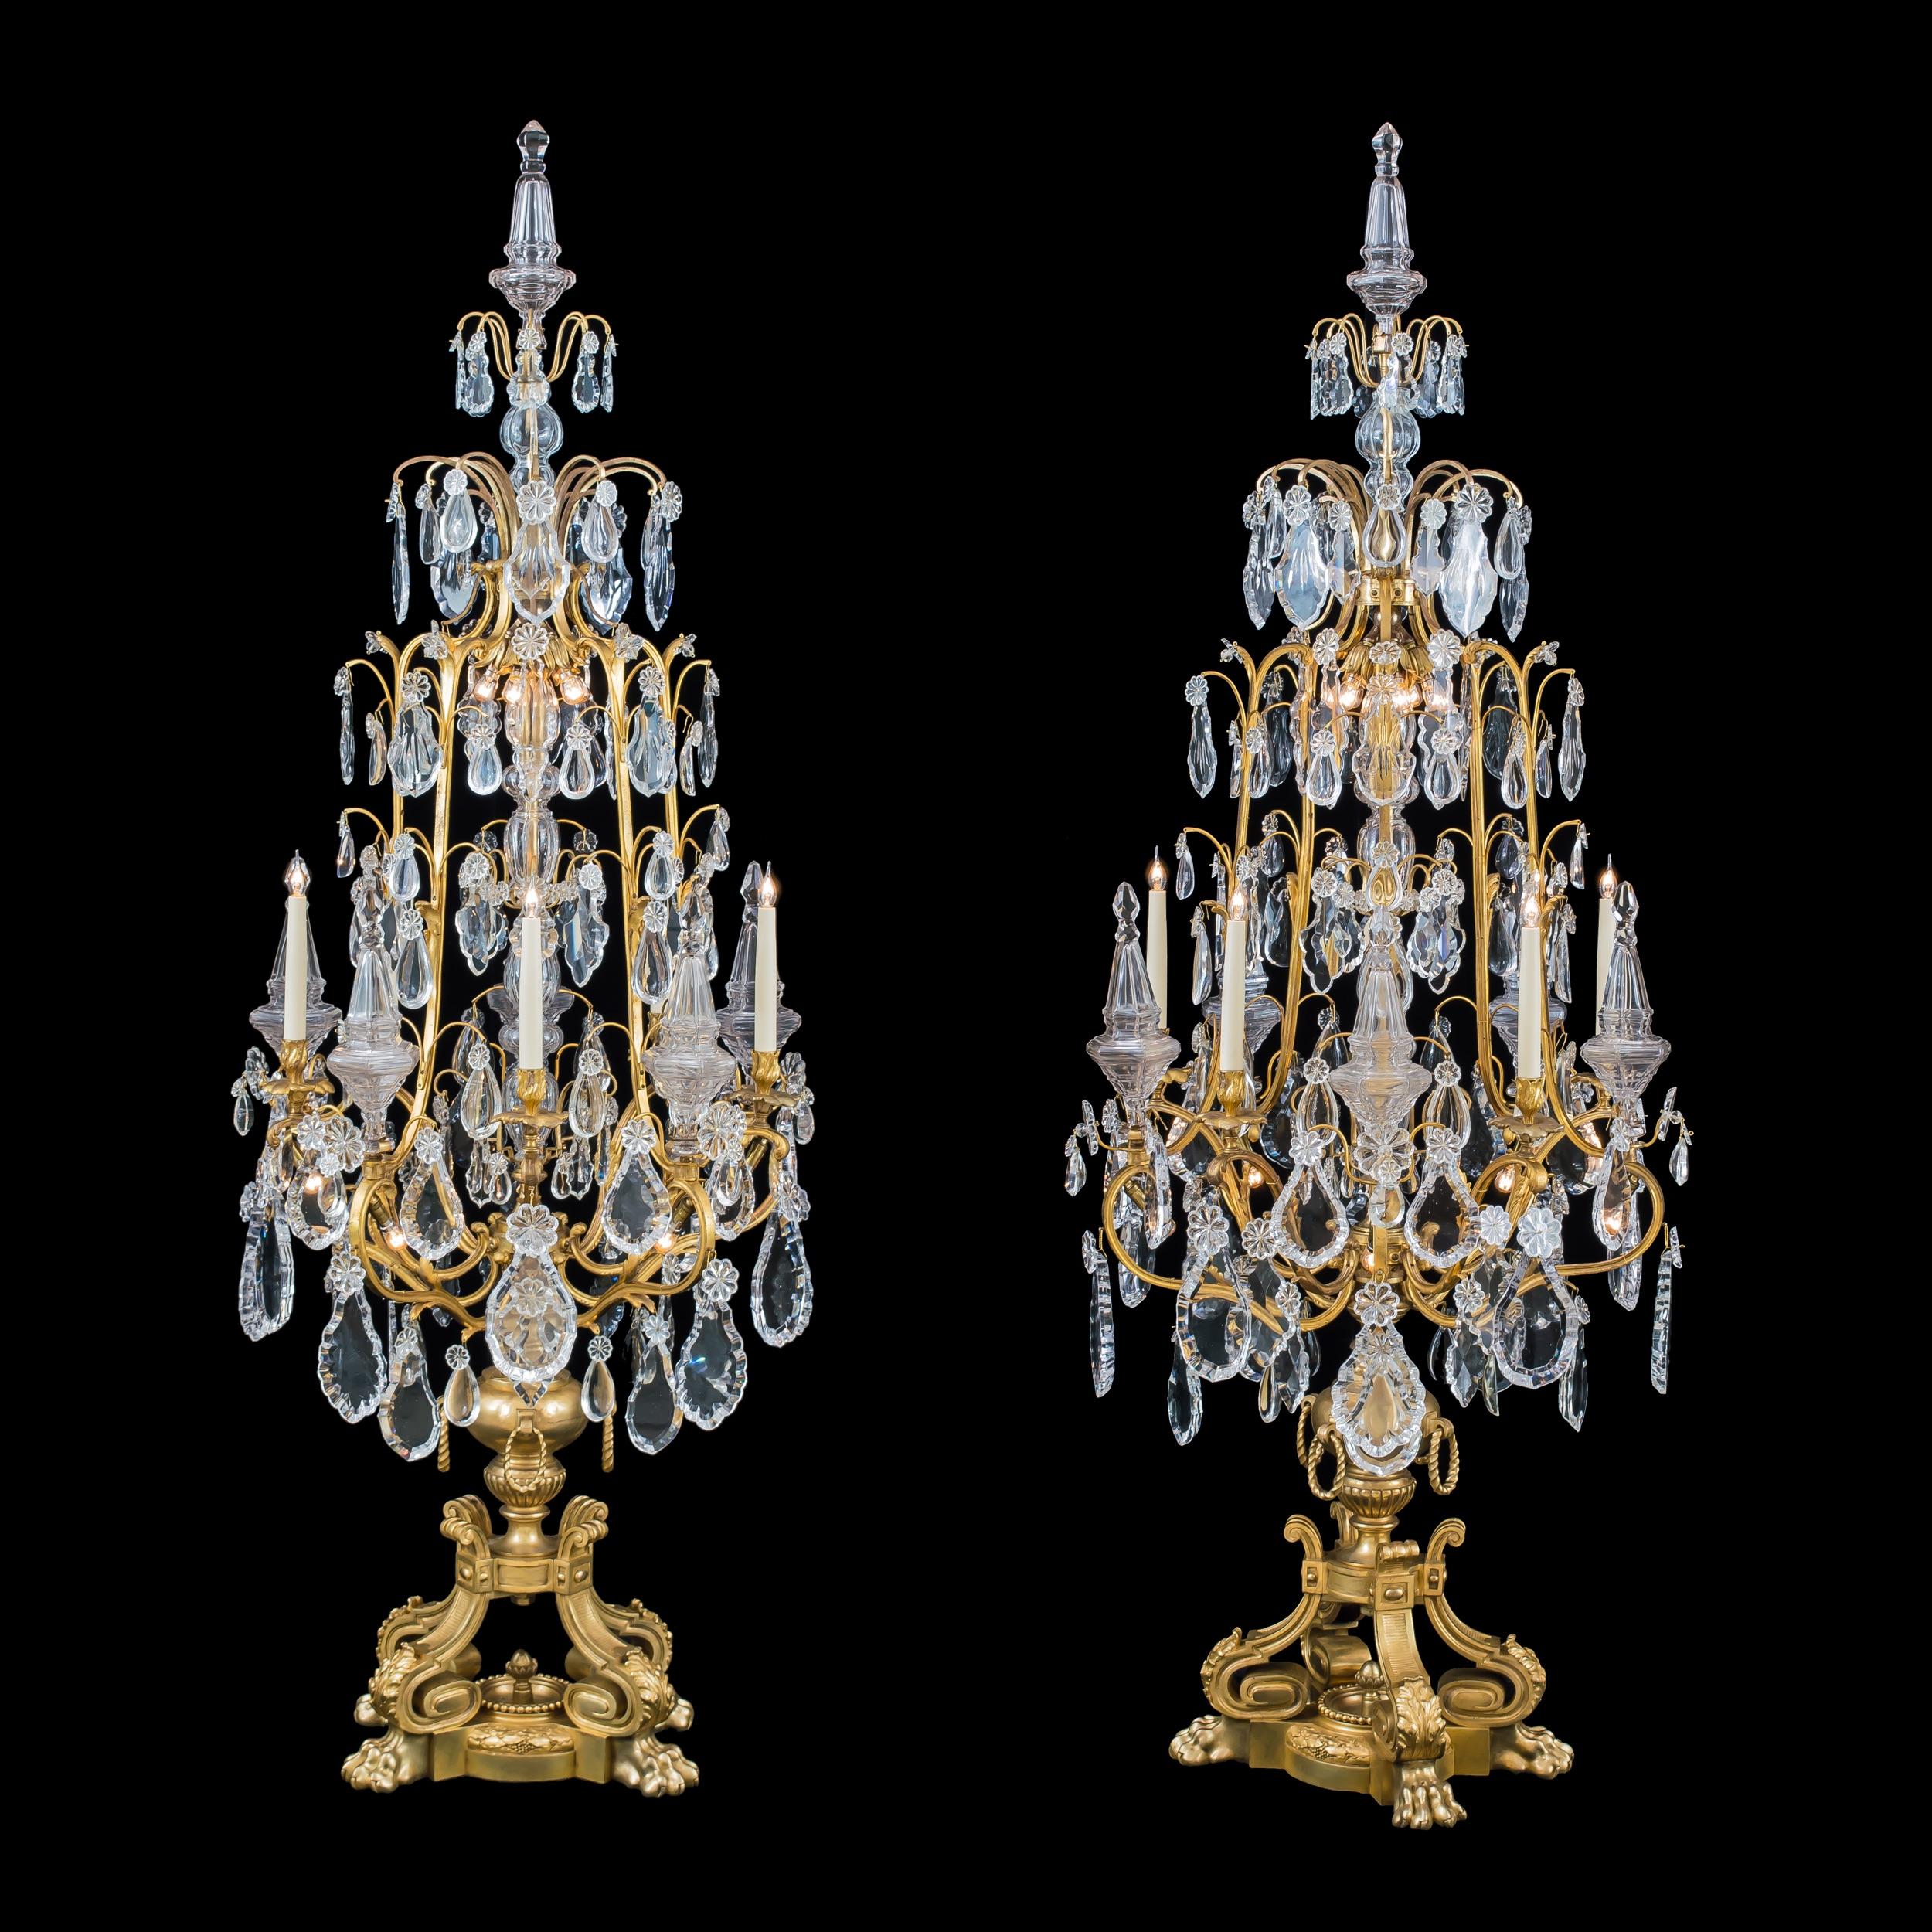 A magnificent pair of Louis XV style
Ormolu and crystal girandoles
Probably by Baccarat

Constructed from finely cast and chased ormolu, the imposing floor candelabra—almost 2-meters tall—are supported on four lion’s paw feet surrounding a